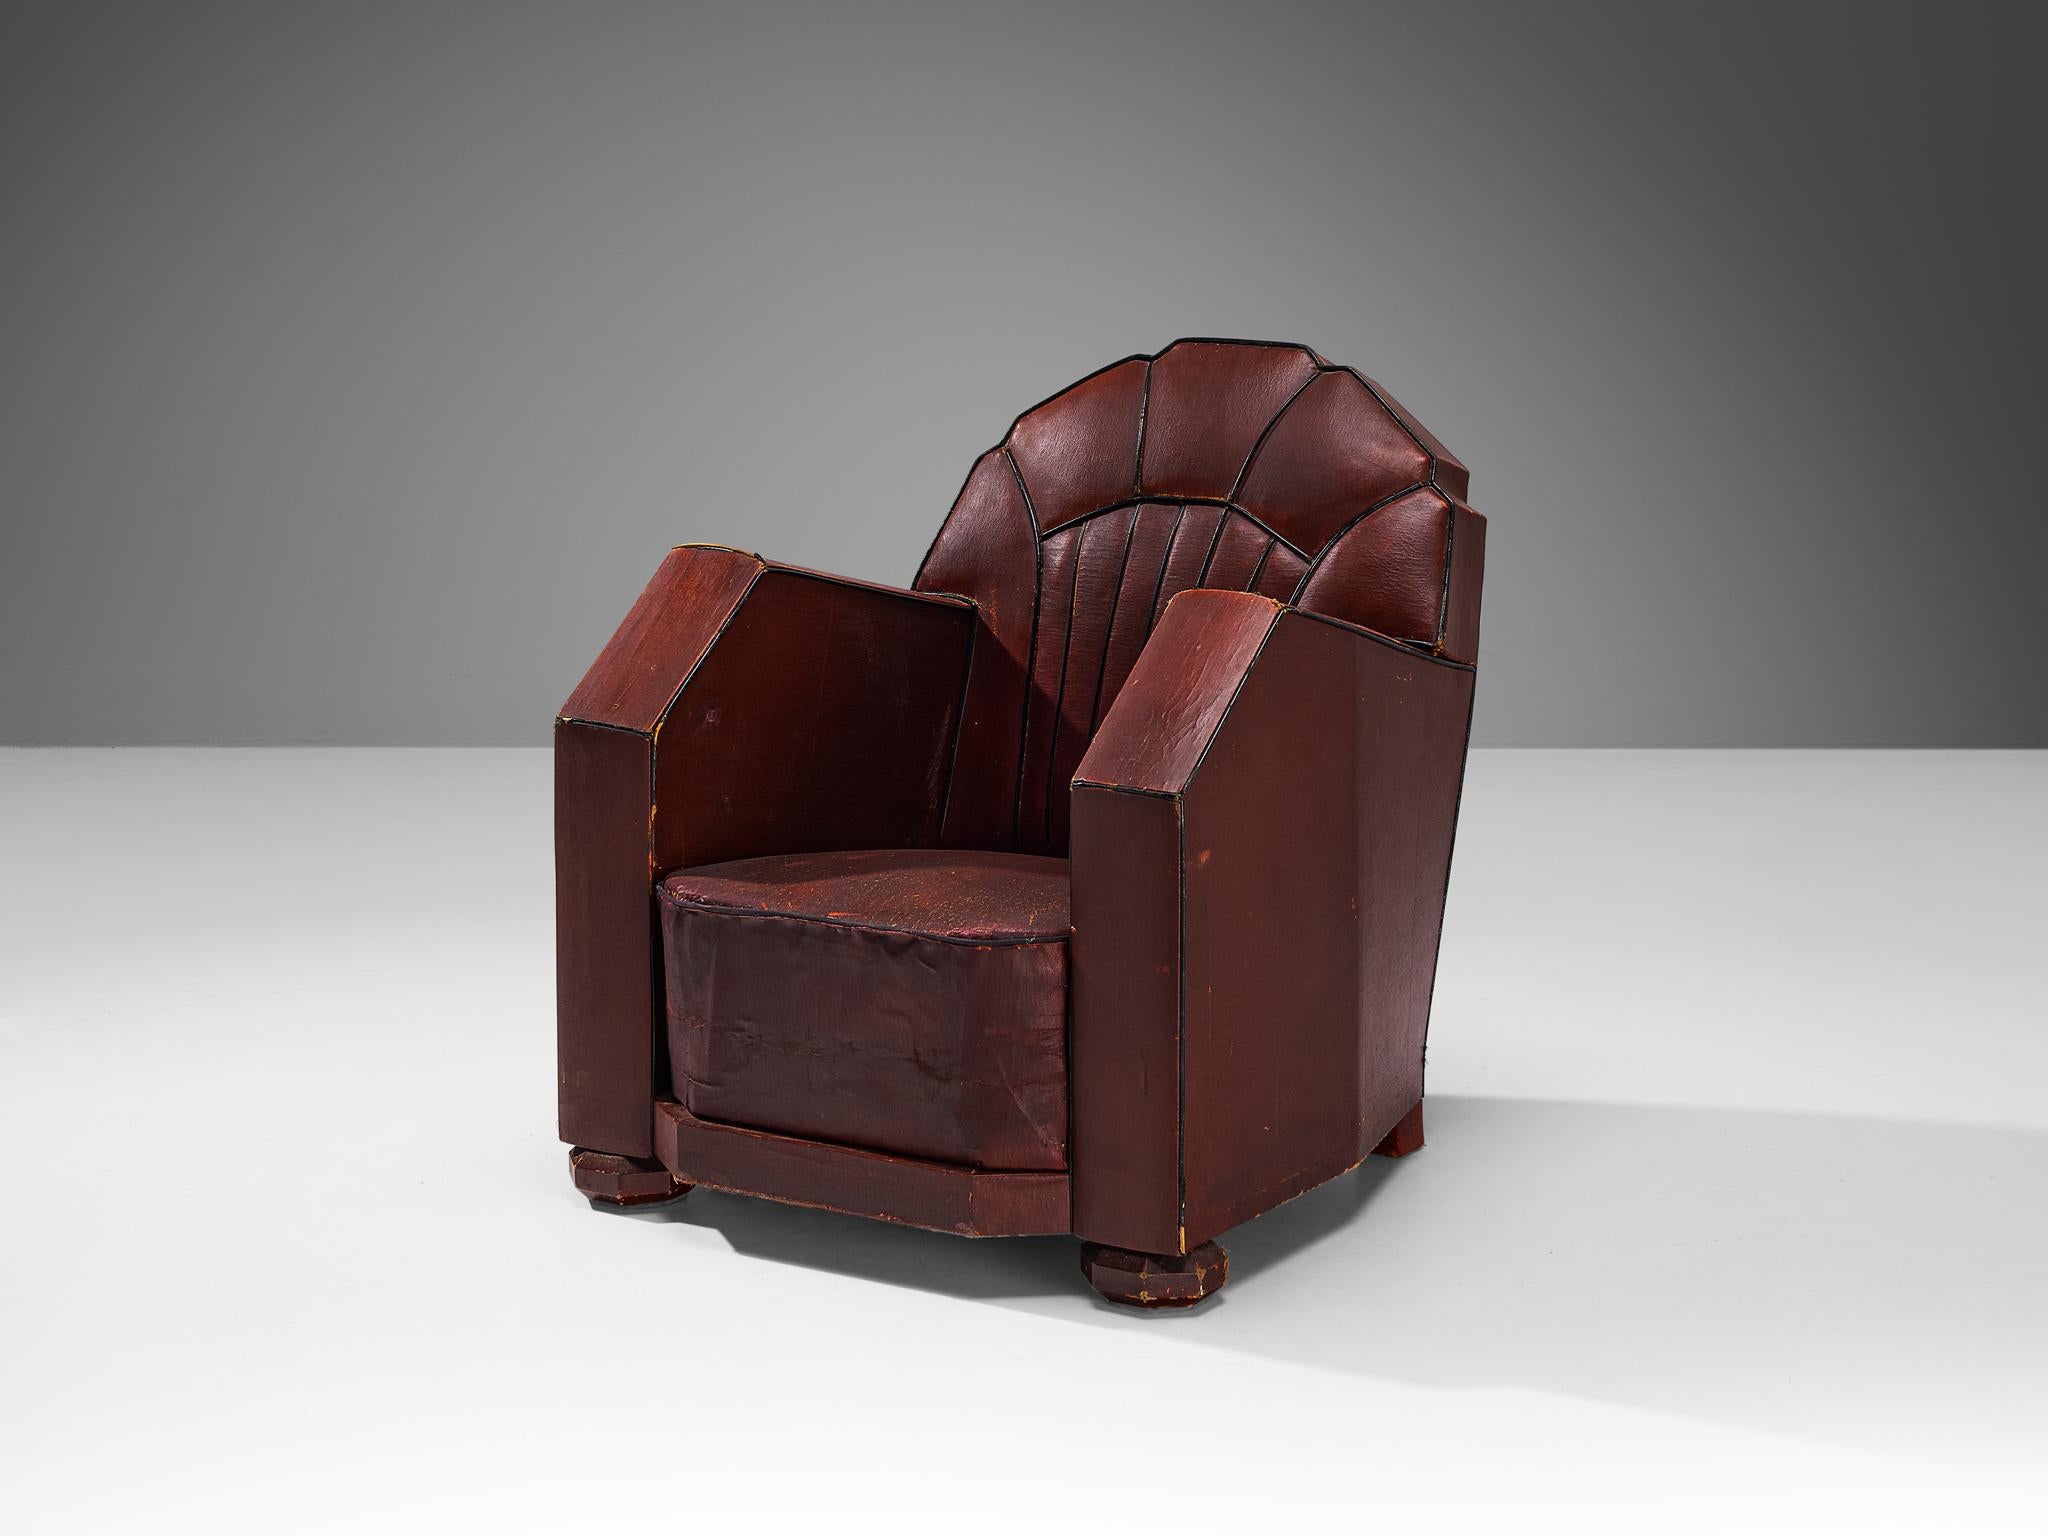 Lounge chair, burgundy red leather, wood, France, 1930s

This armchair of French origin undoubtedly breathes the Art Deco Period of the 1930s. The chair features beautiful streamlined lines and sharp edges. The contours are beautifully highlighted